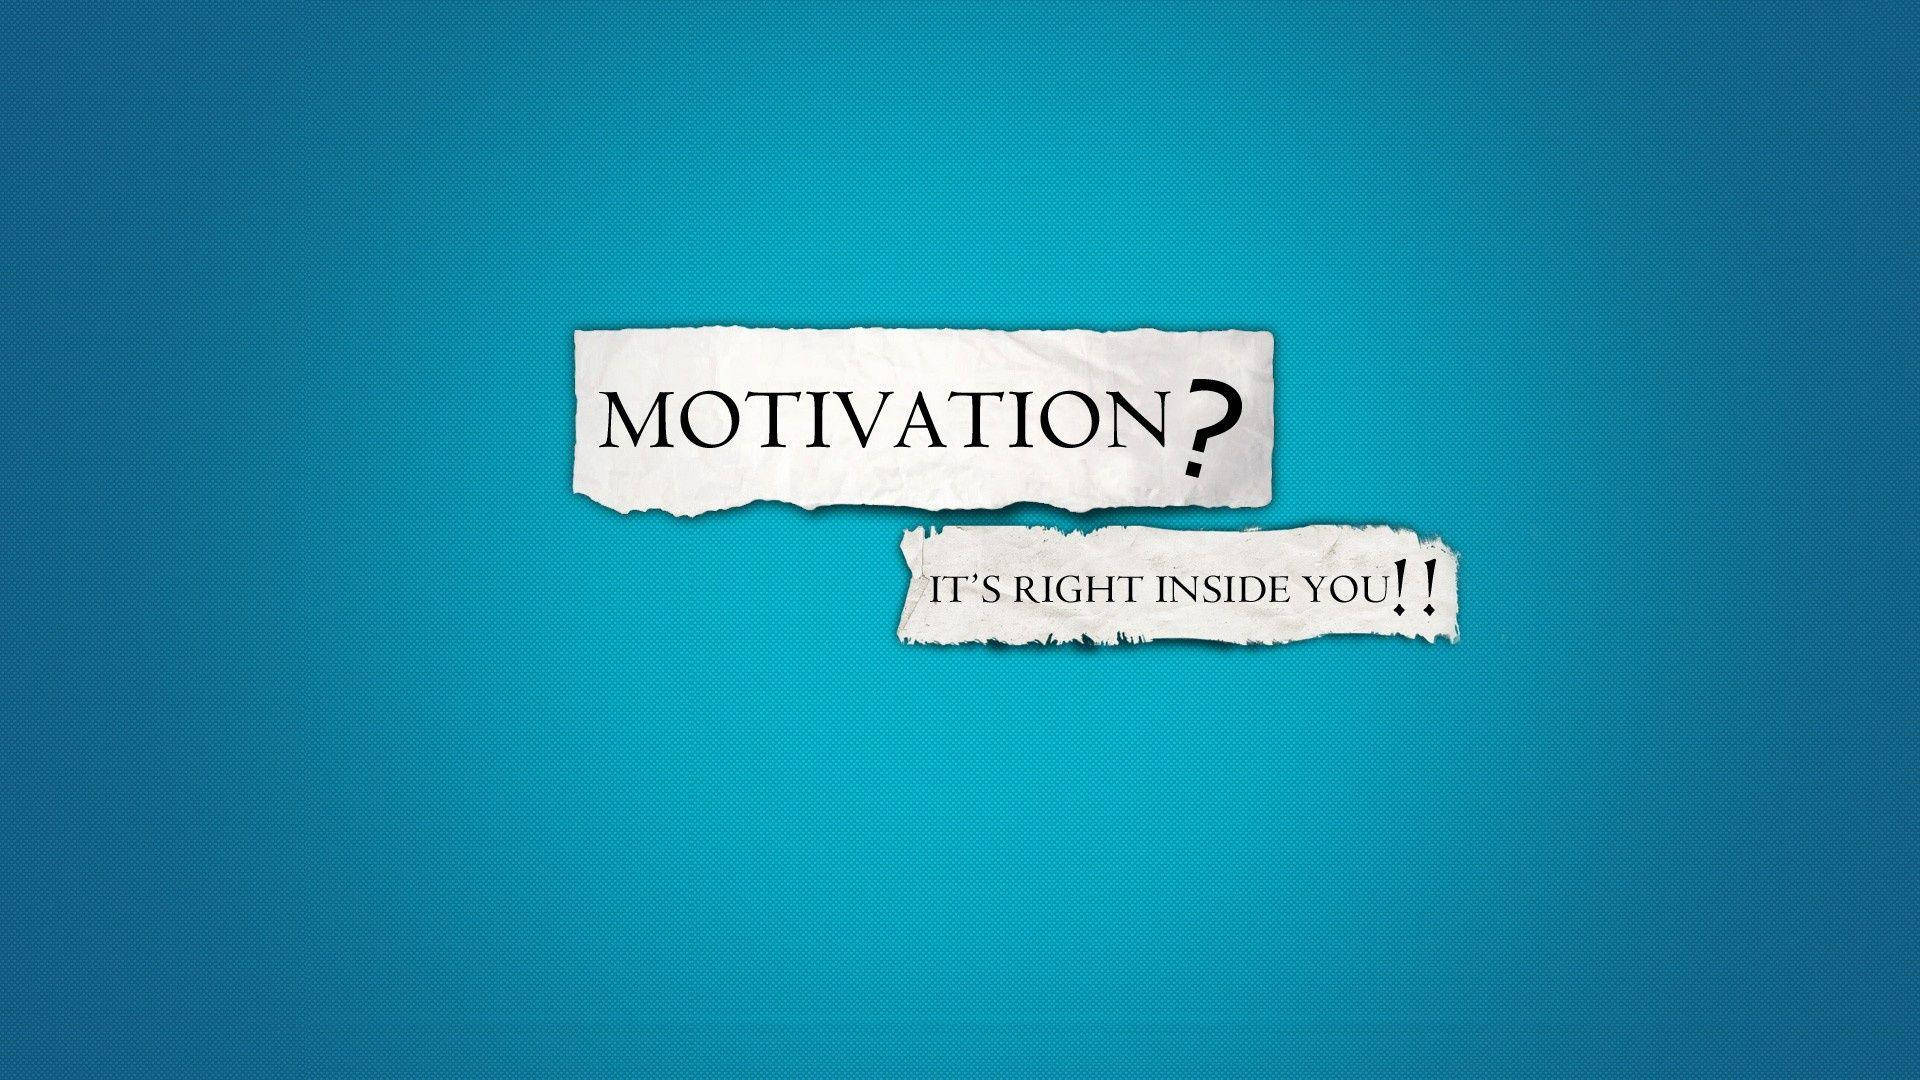 Motivational Hd Image In Blue Background